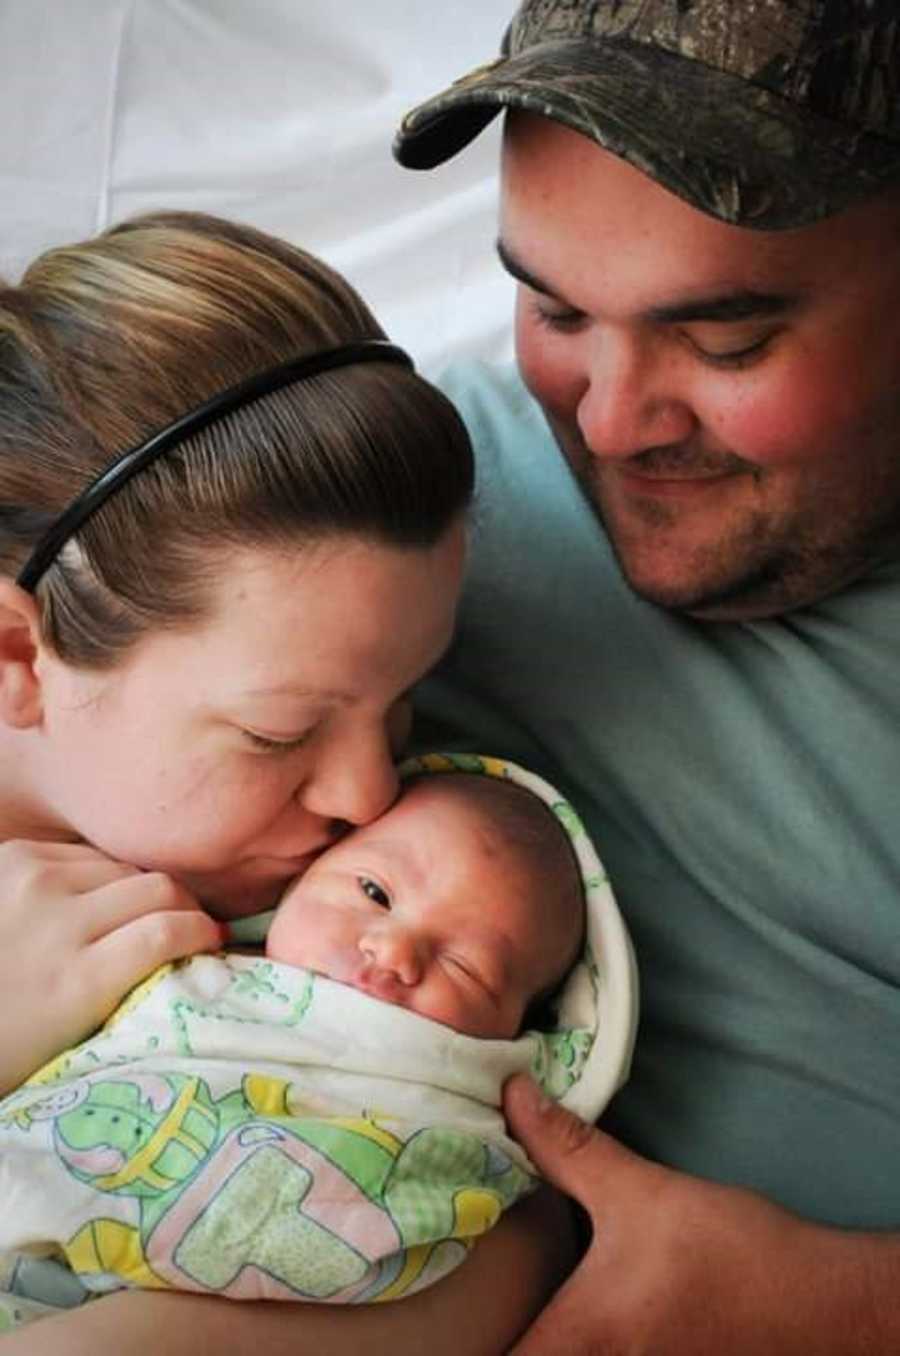 Mother kisses newborn baby's head that is held in her arms while husband sits next to her